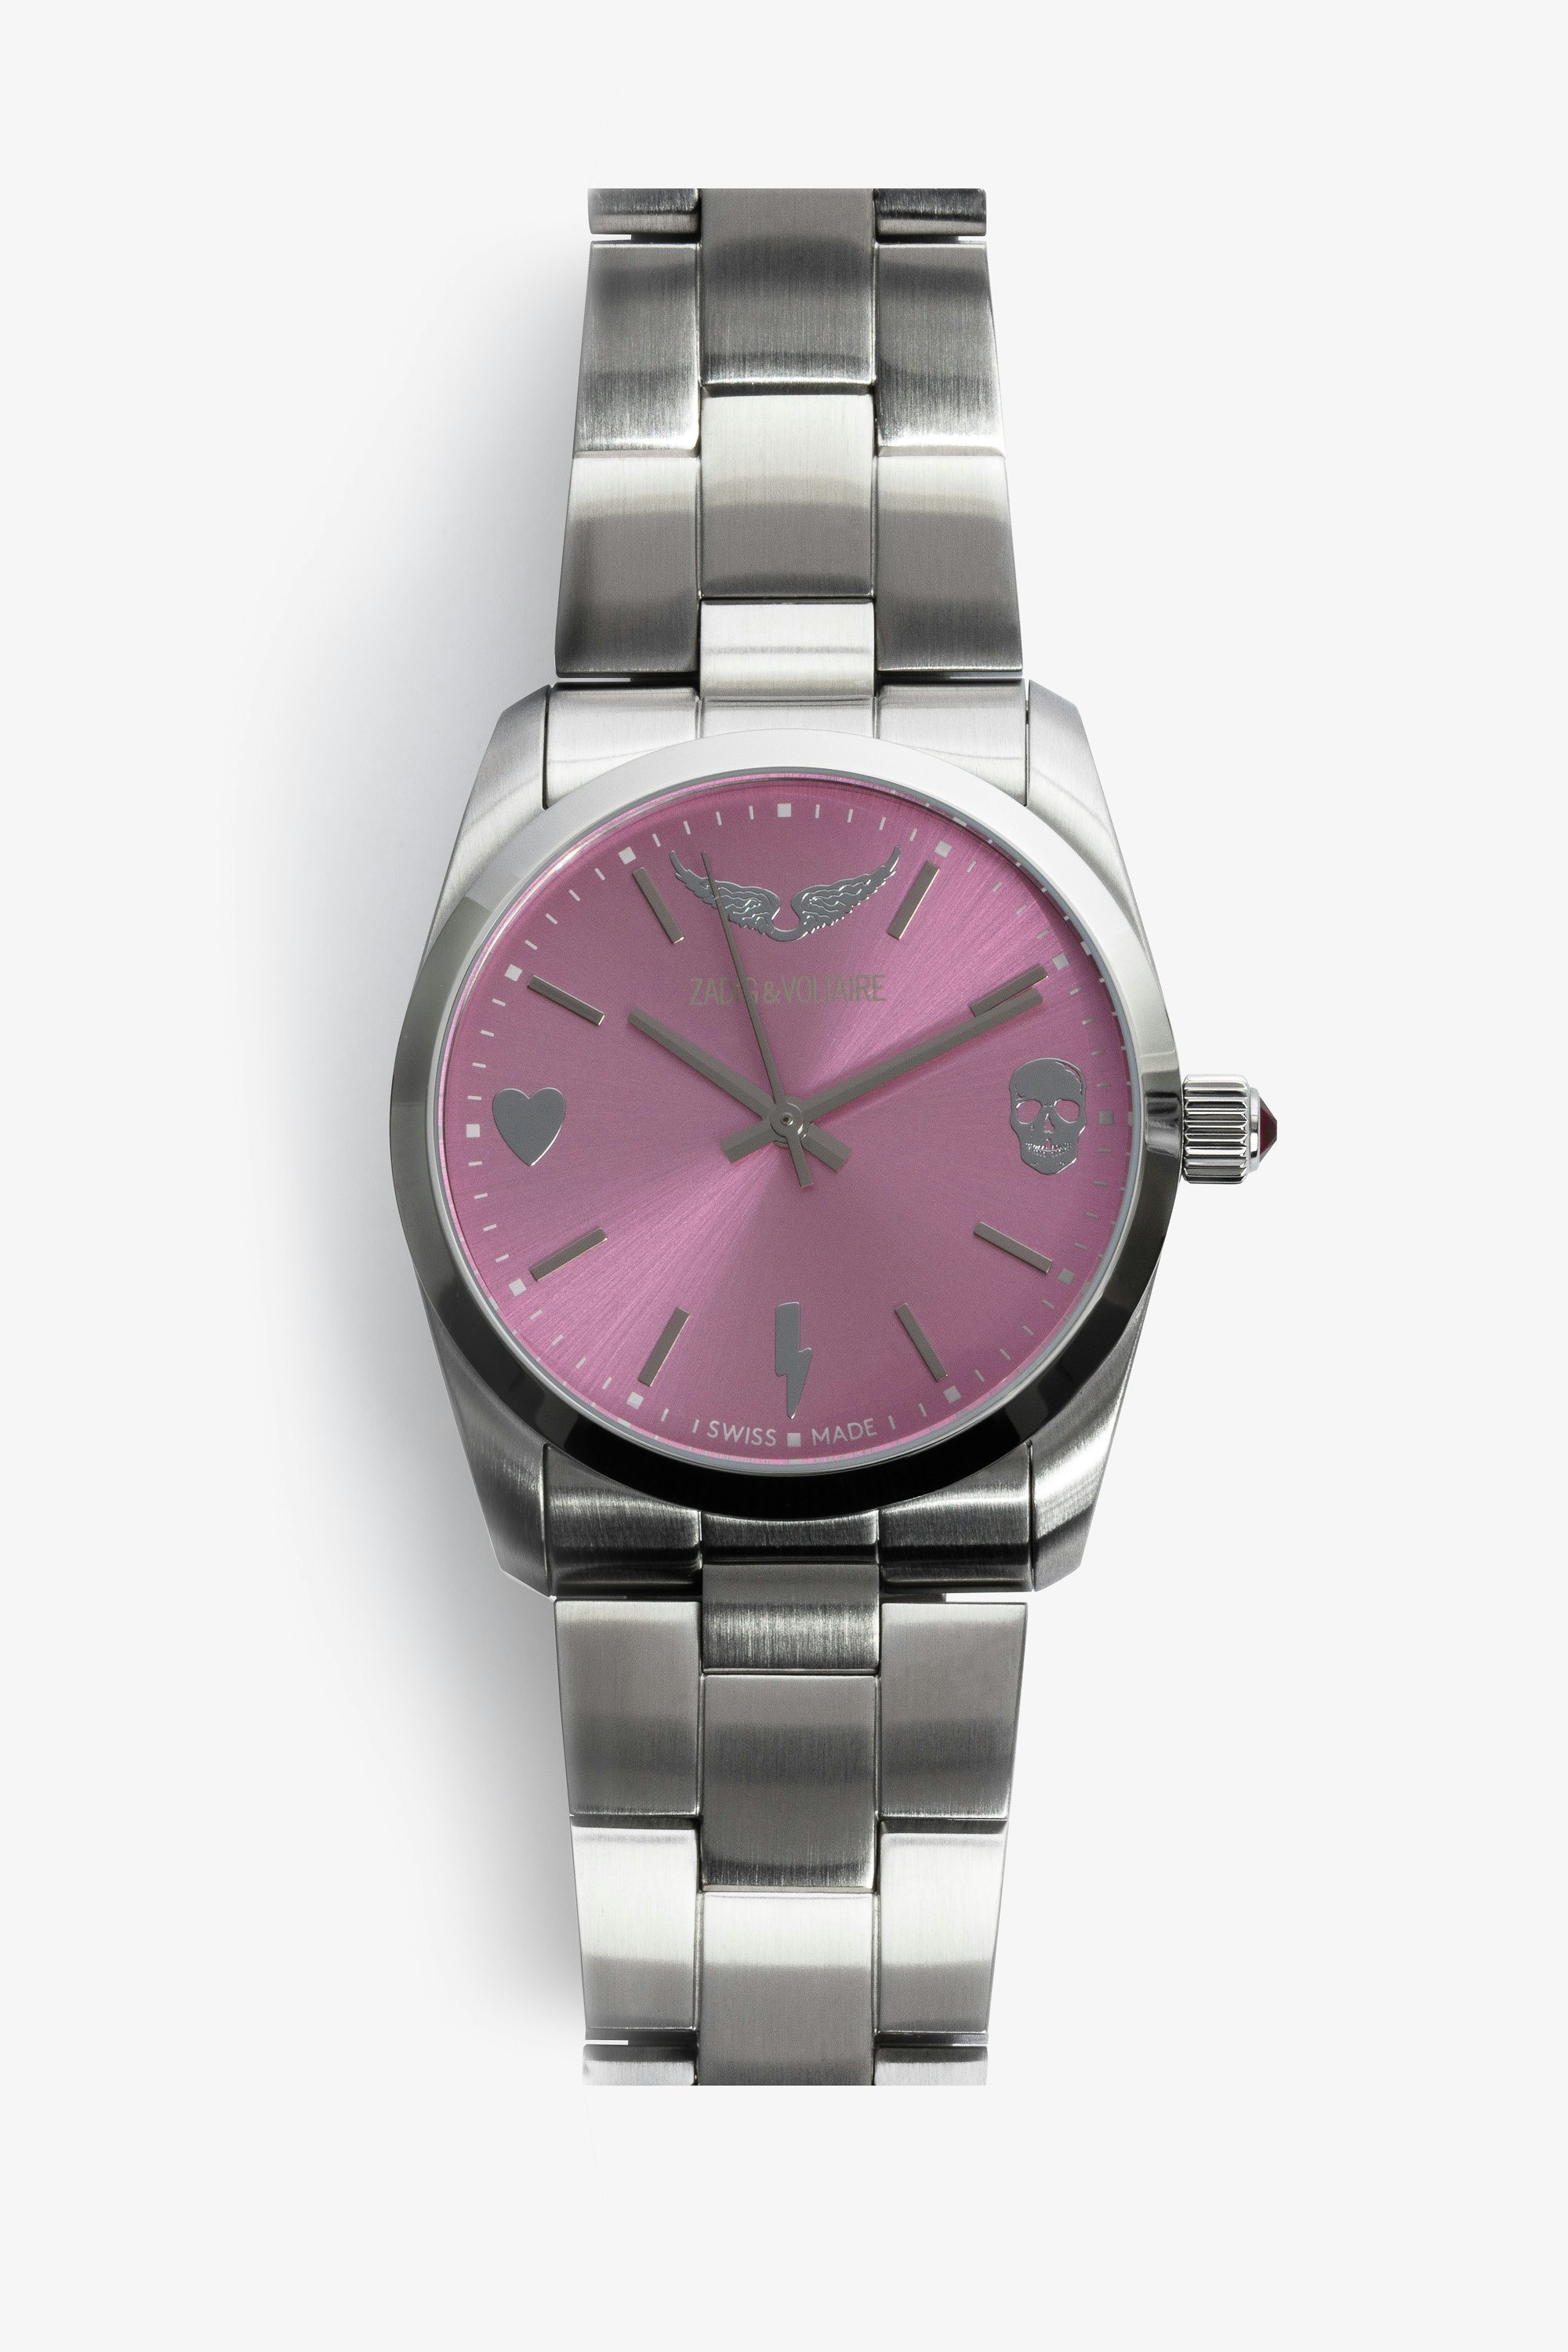 Time2Love Watch - Women's stainless steel watch with pink face